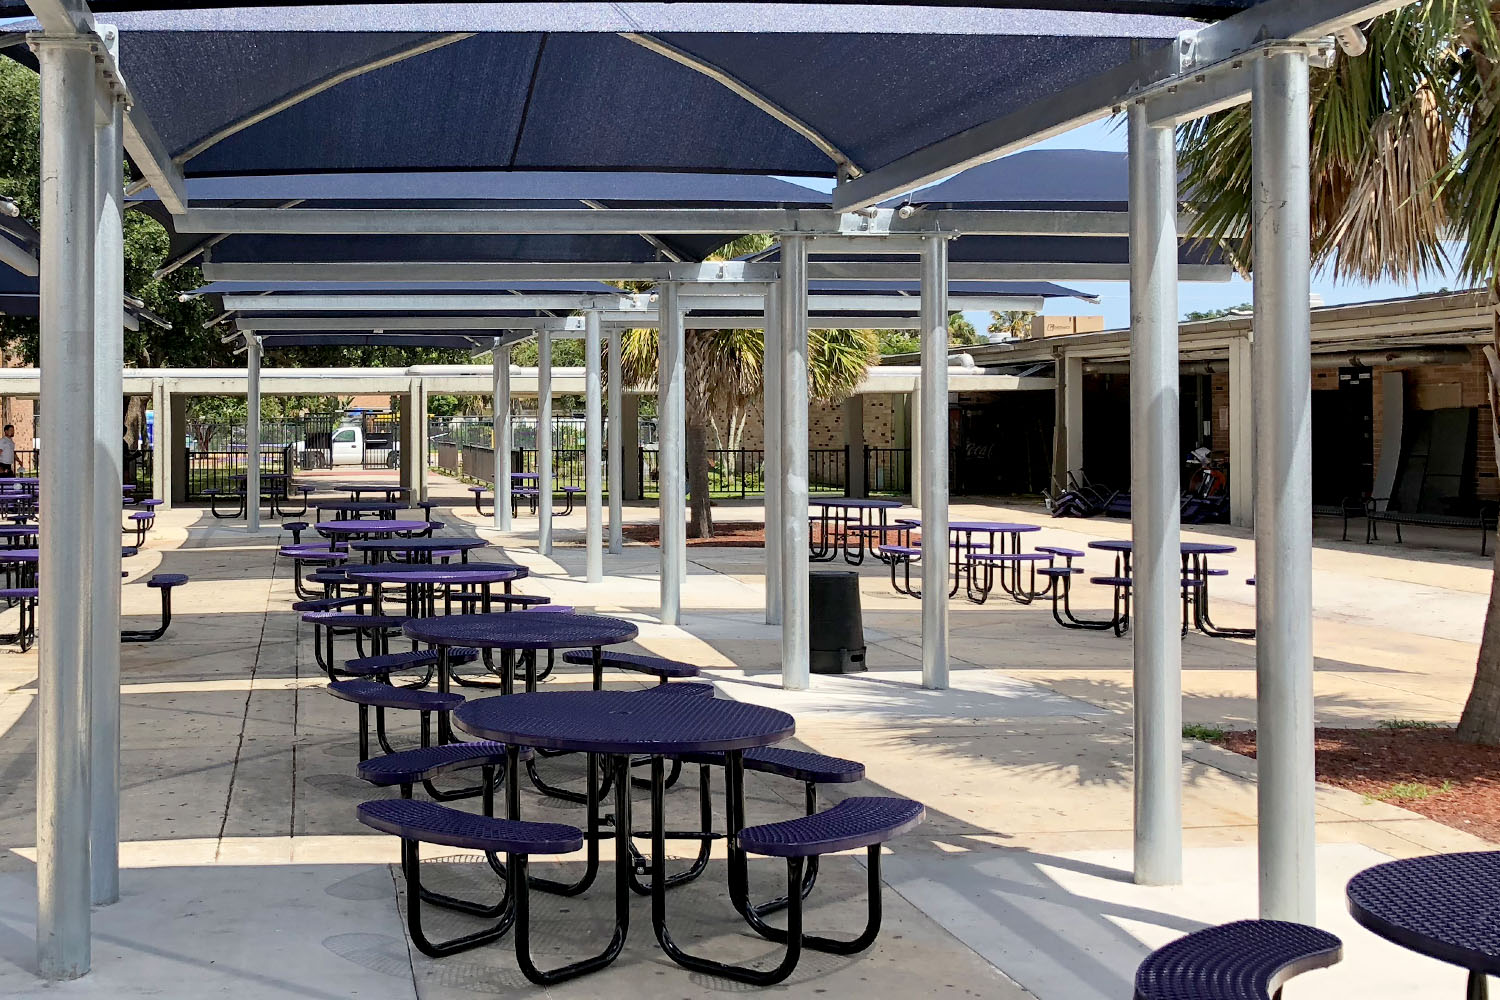 Covered outdoor student dining at Fletcher High School